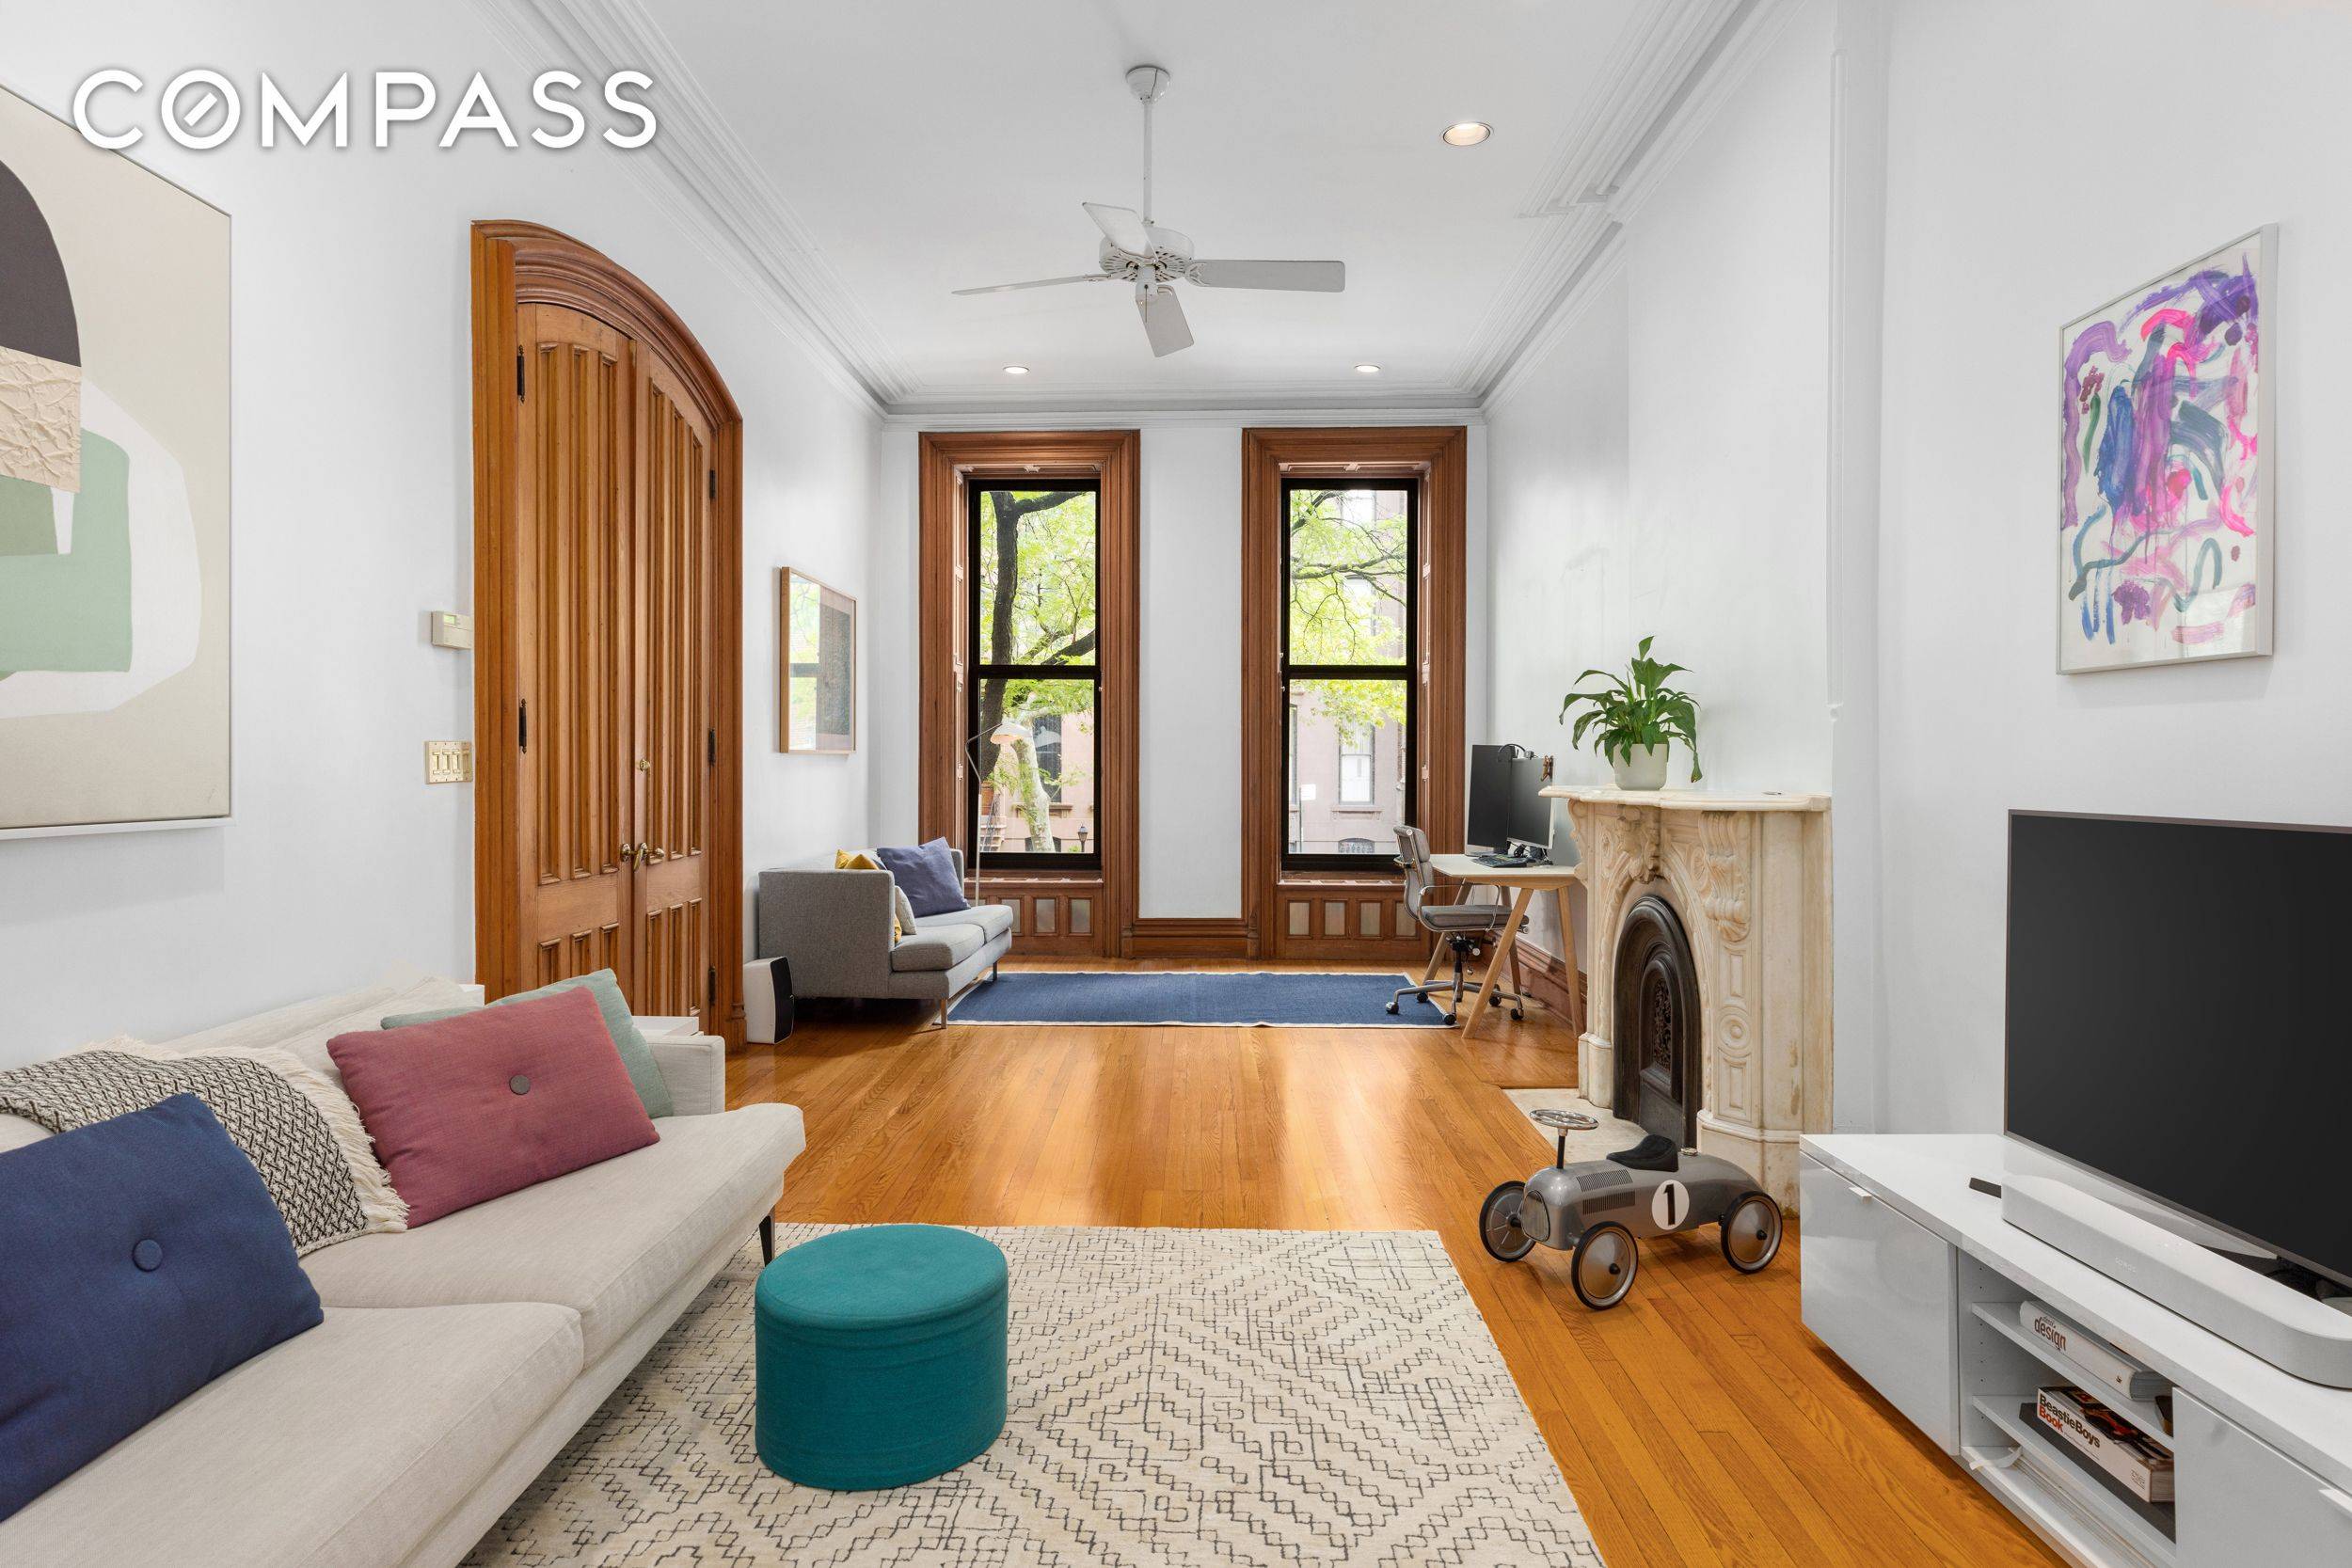 Welcome home to residence 1 at 44 Sterling Place, located in a beautiful pre war brownstone, on a tree lined street in the heart of Park Slope.